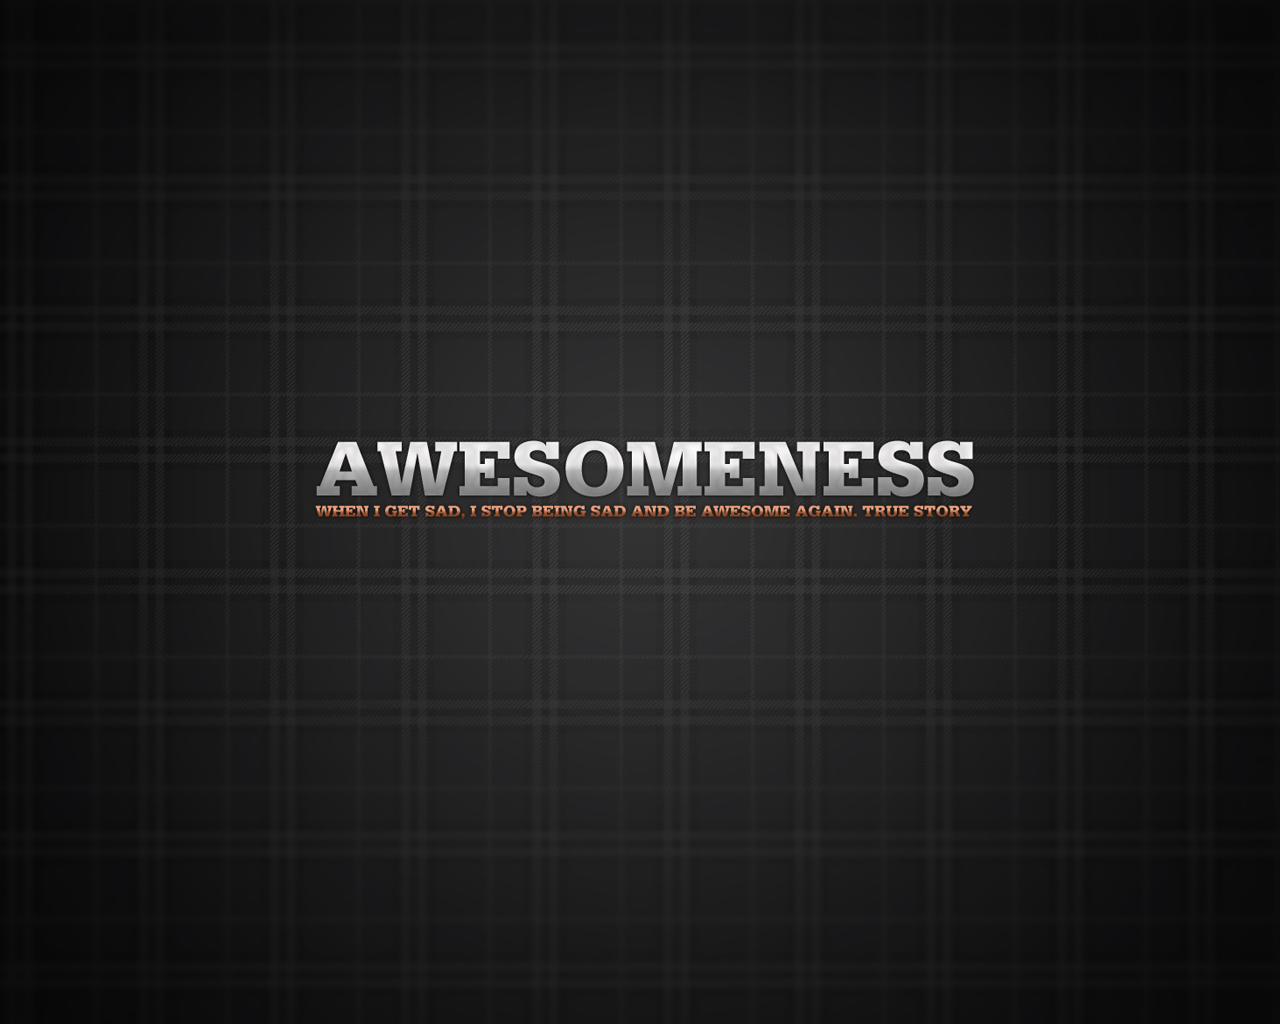 Motivational With Awesomeness HD Wallpaper 3d Abstract